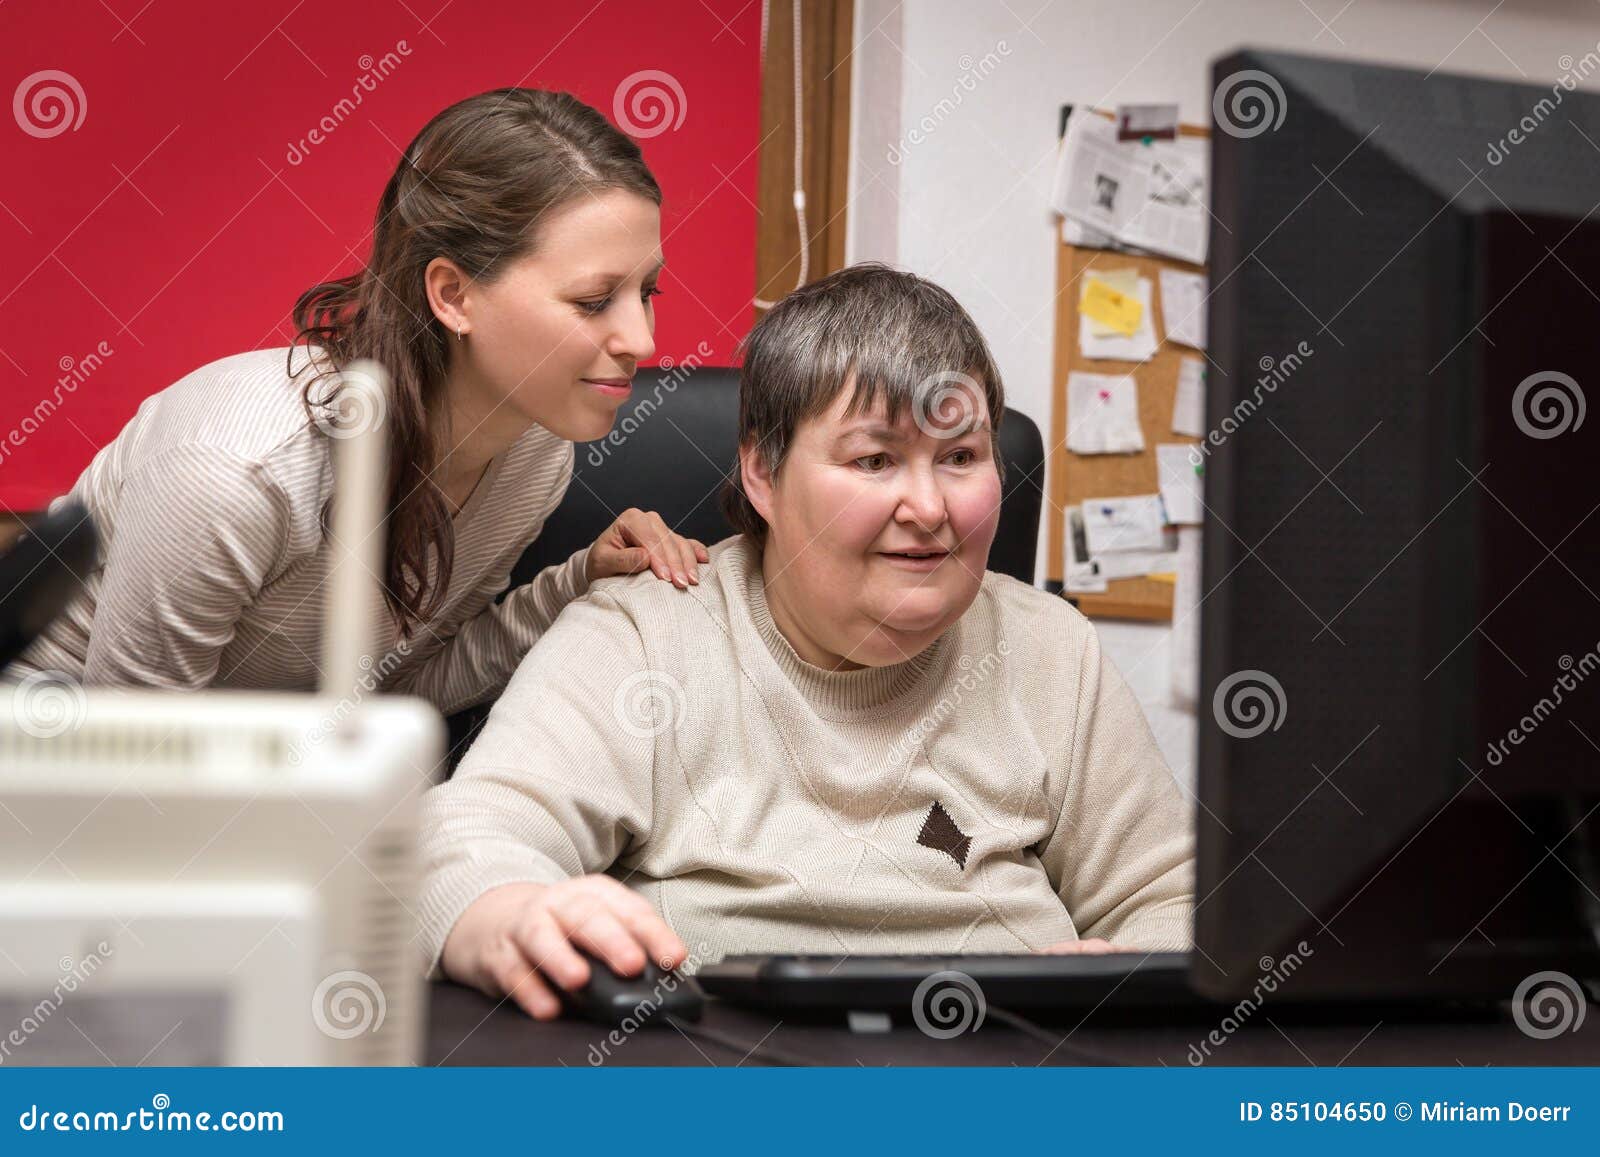 caregiver and mentally disabled woman learning at the computer